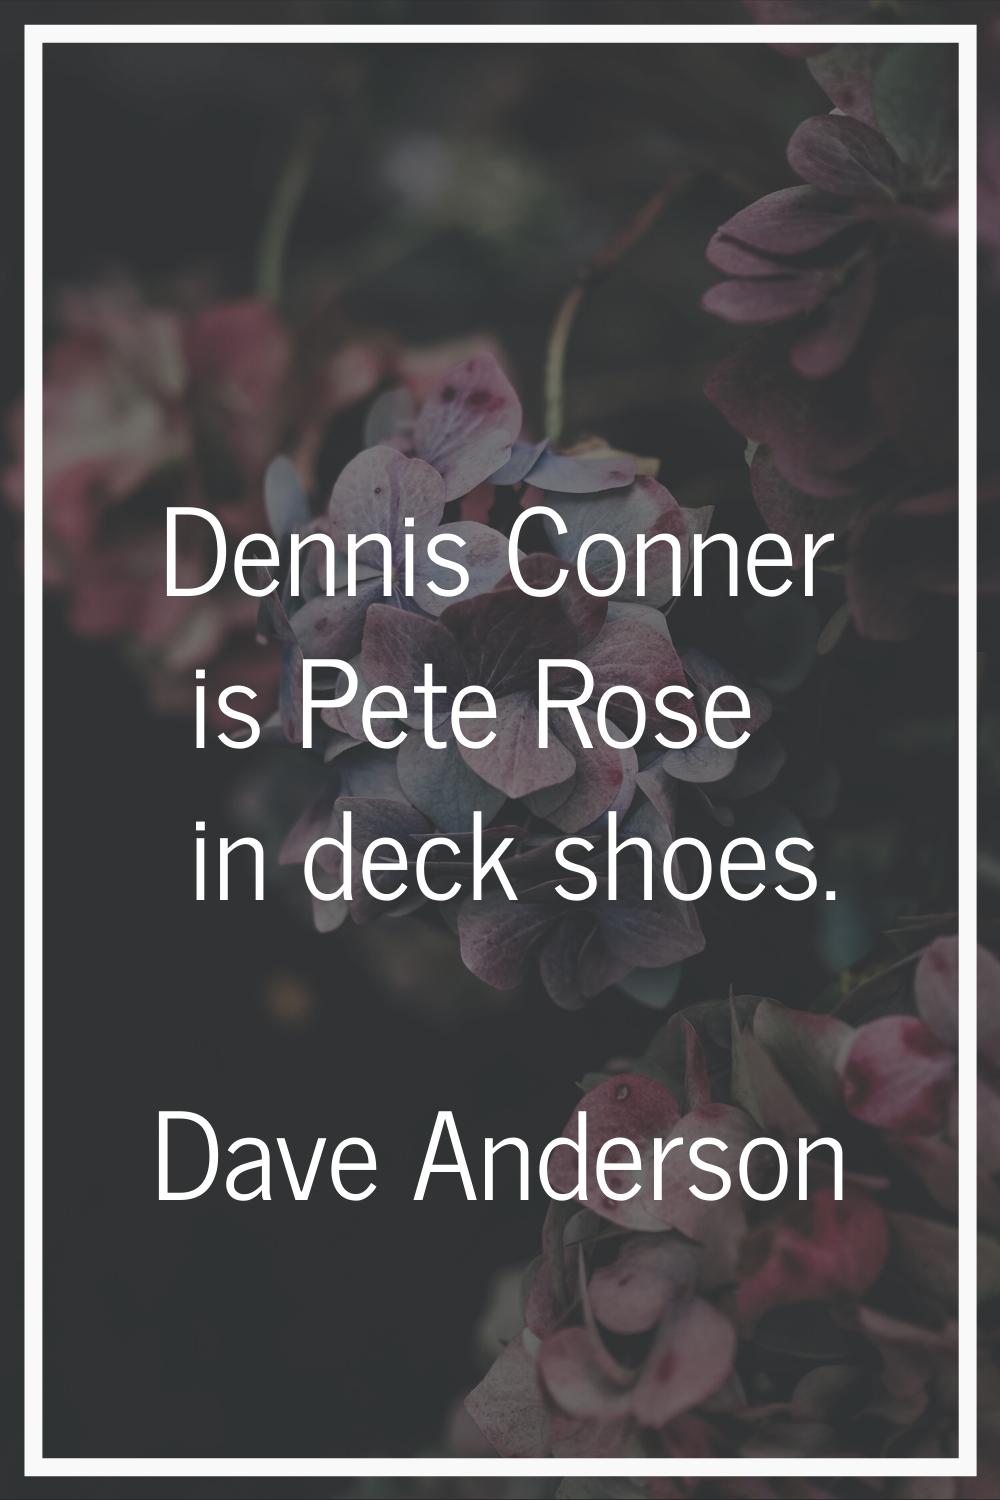 Dennis Conner is Pete Rose in deck shoes.